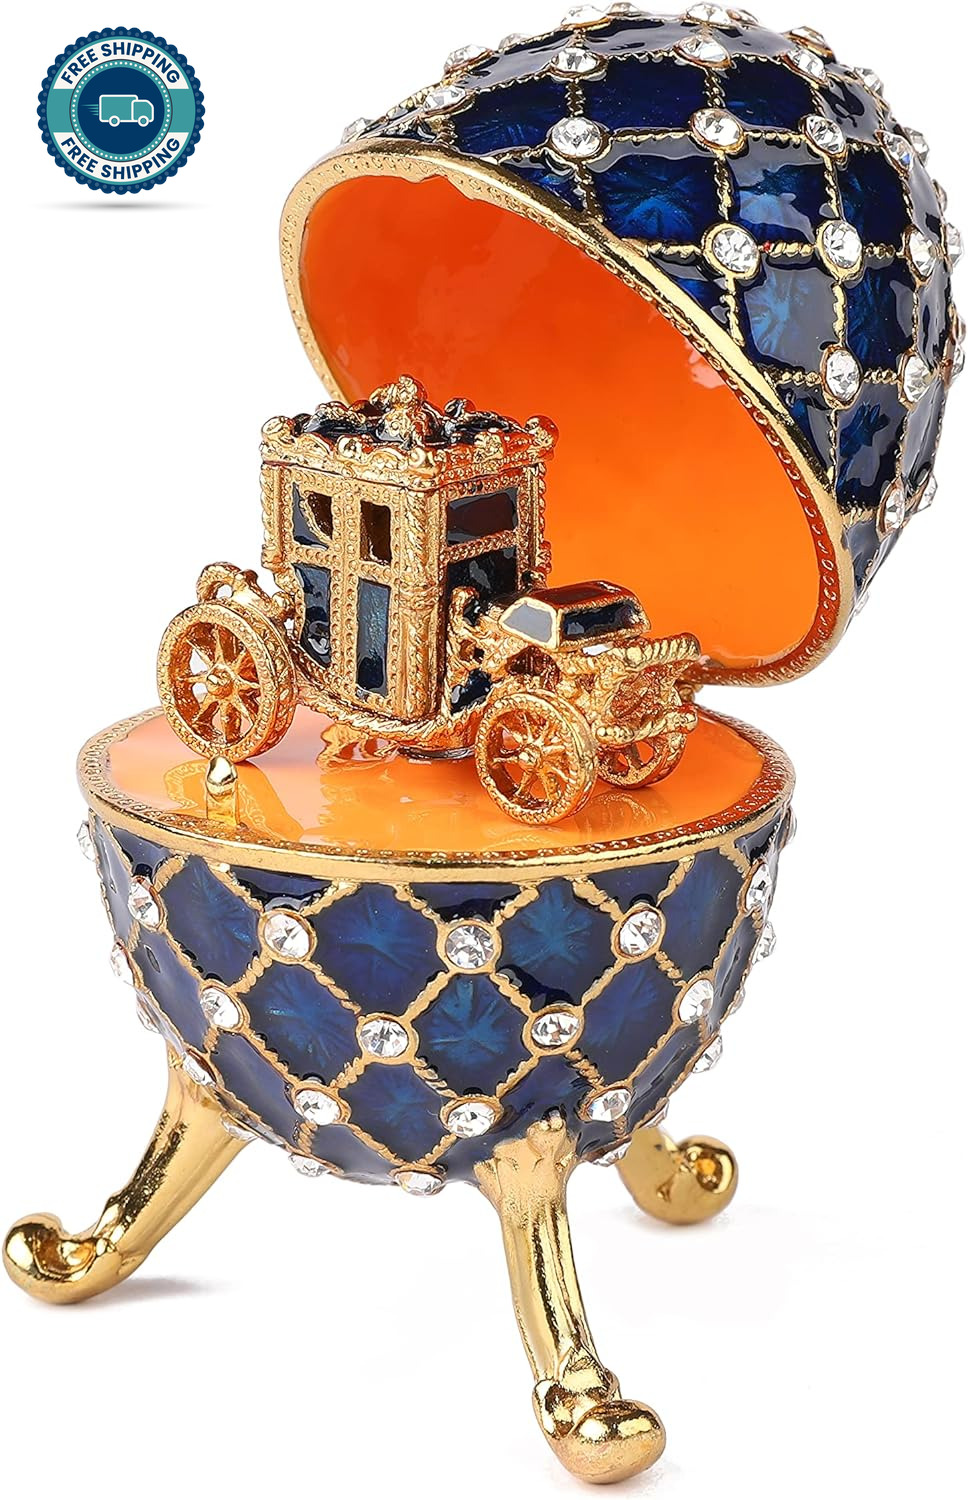 Vintage Blue Imperial Faberge Egg Style Trinket Box with Mini Royal Carriage, Un